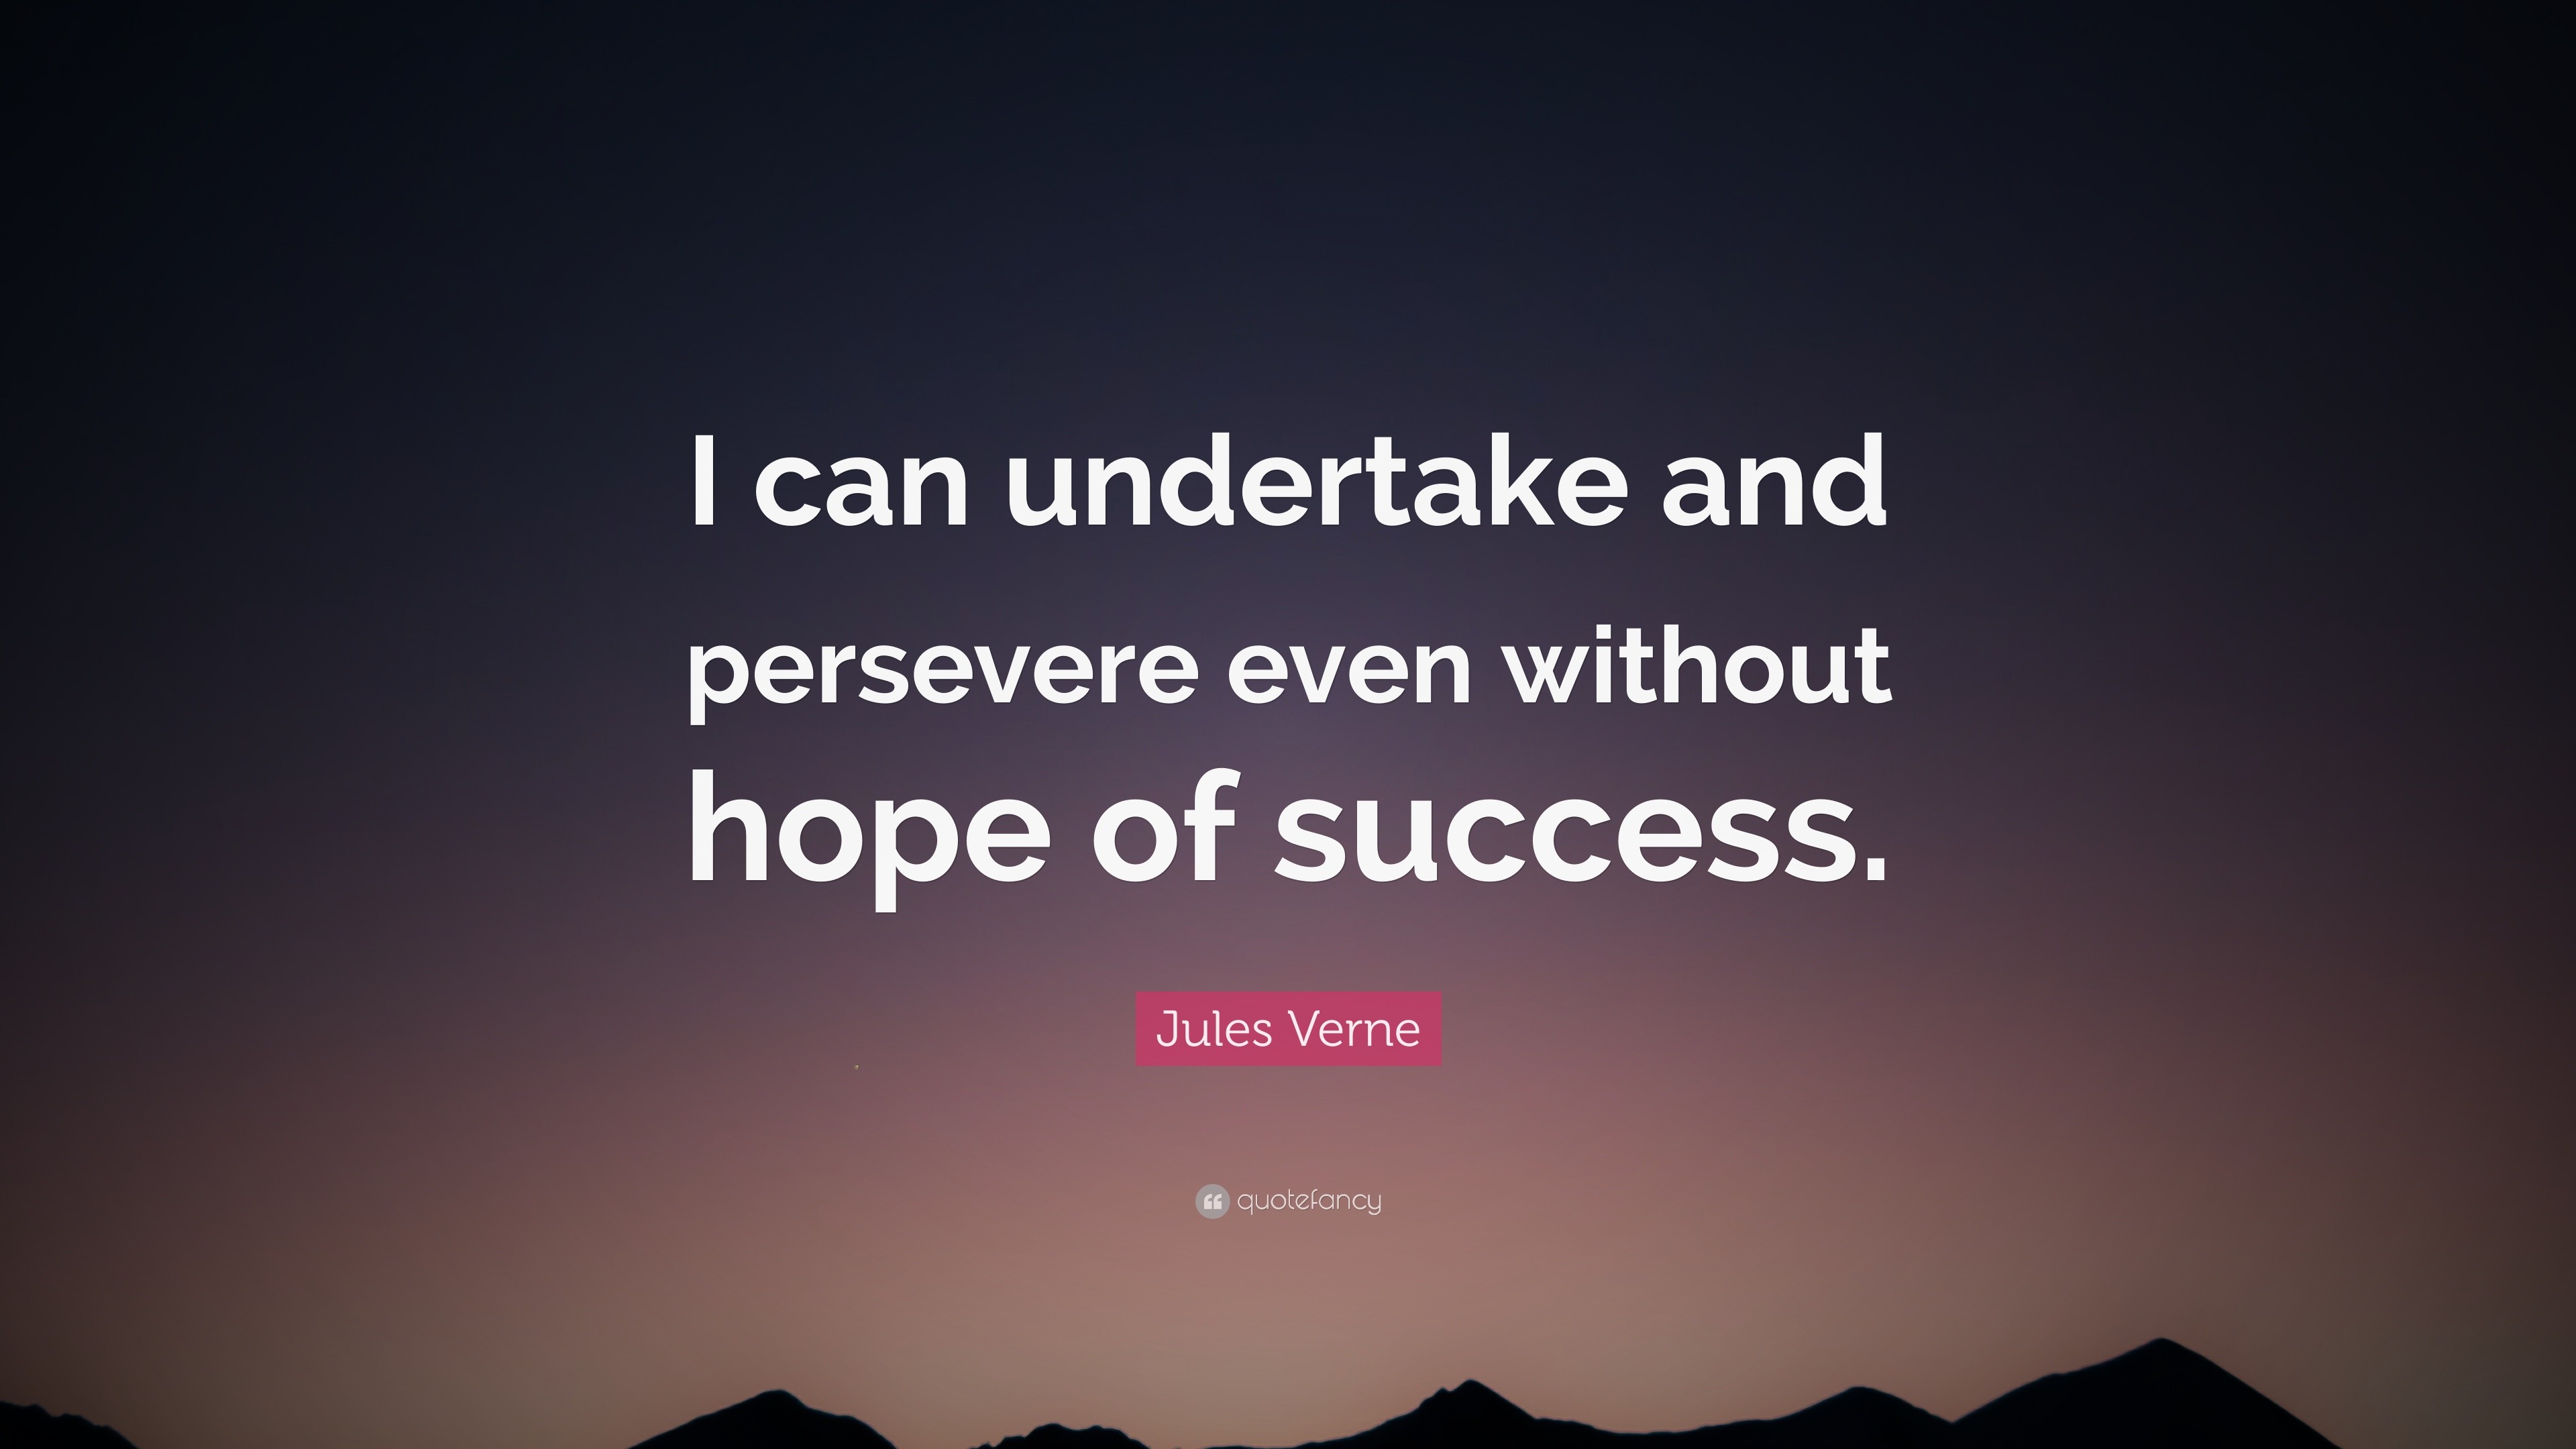 Jules Verne Quote: “I can undertake and persevere even without hope of ...